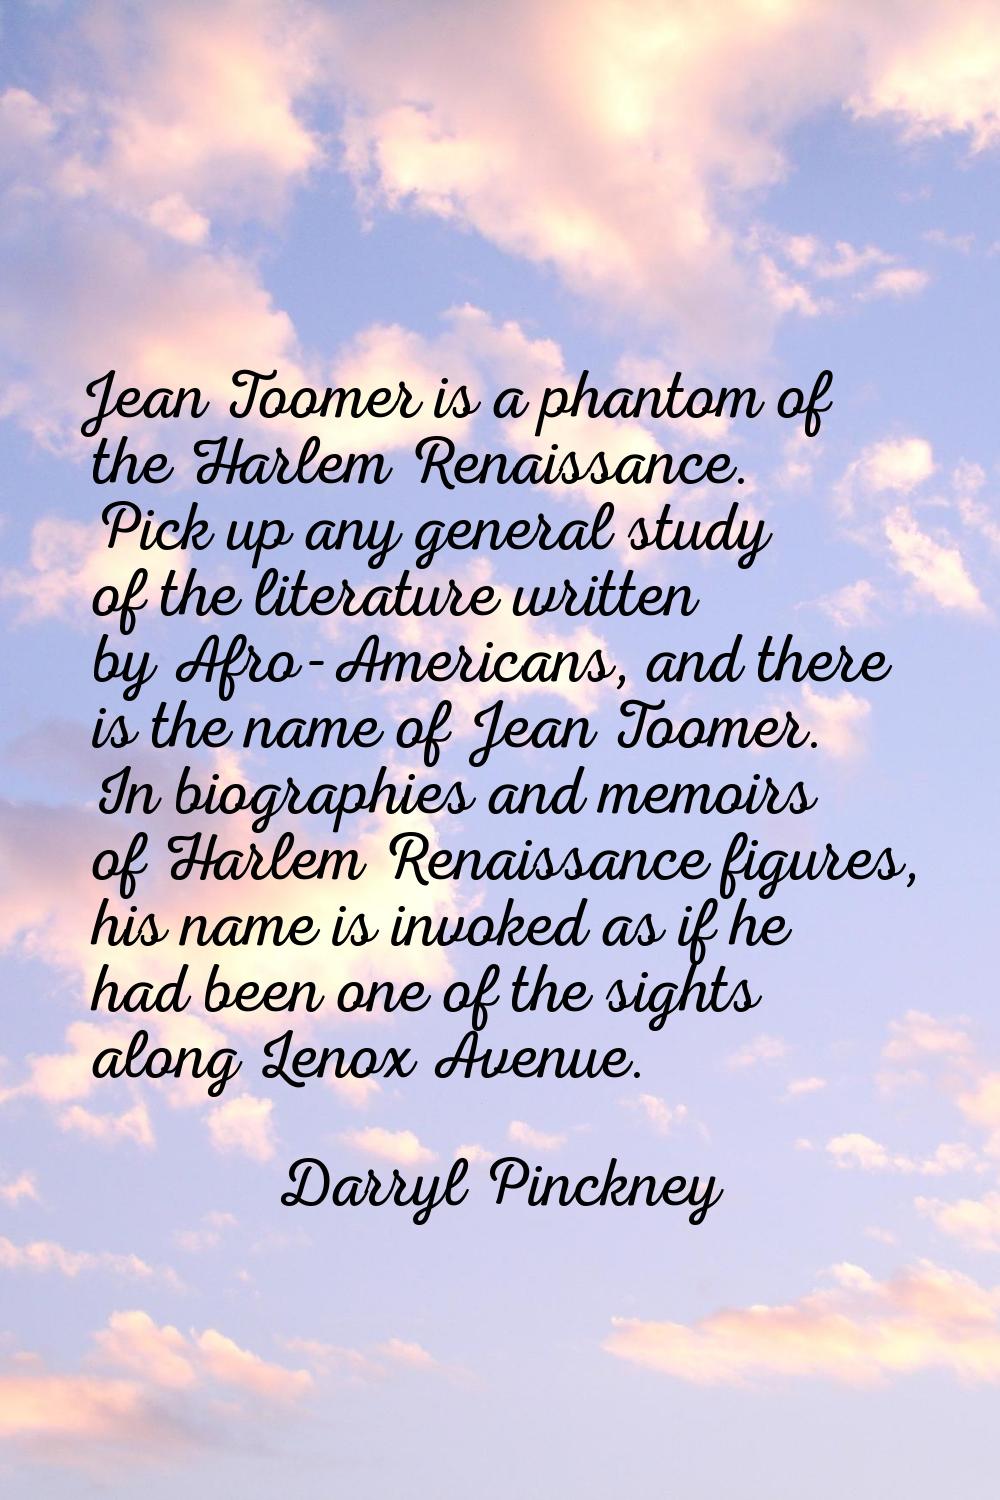 Jean Toomer is a phantom of the Harlem Renaissance. Pick up any general study of the literature wri